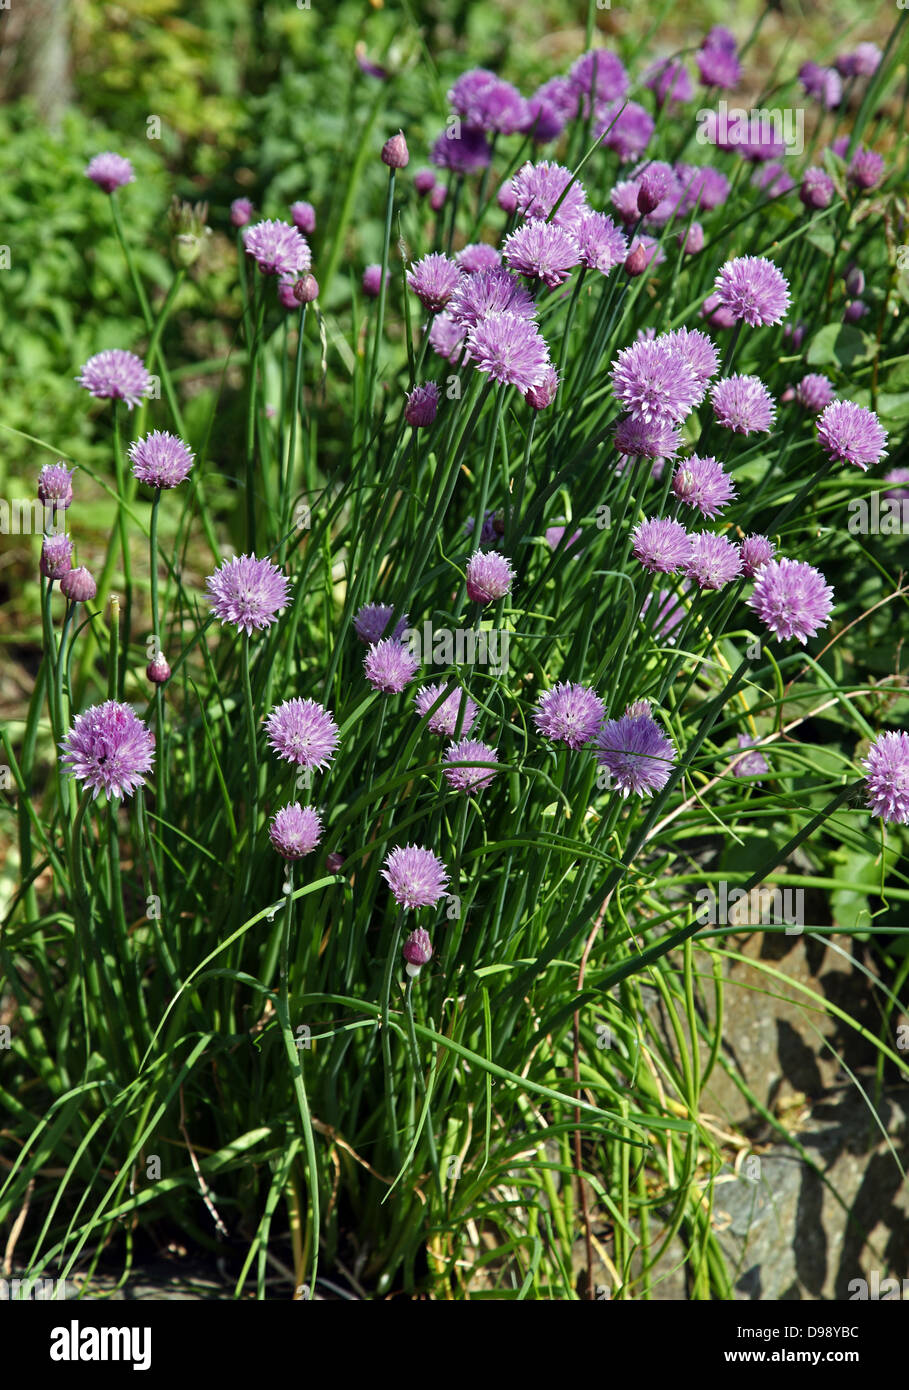 Chives, culinary and medicinal herb Stock Photo